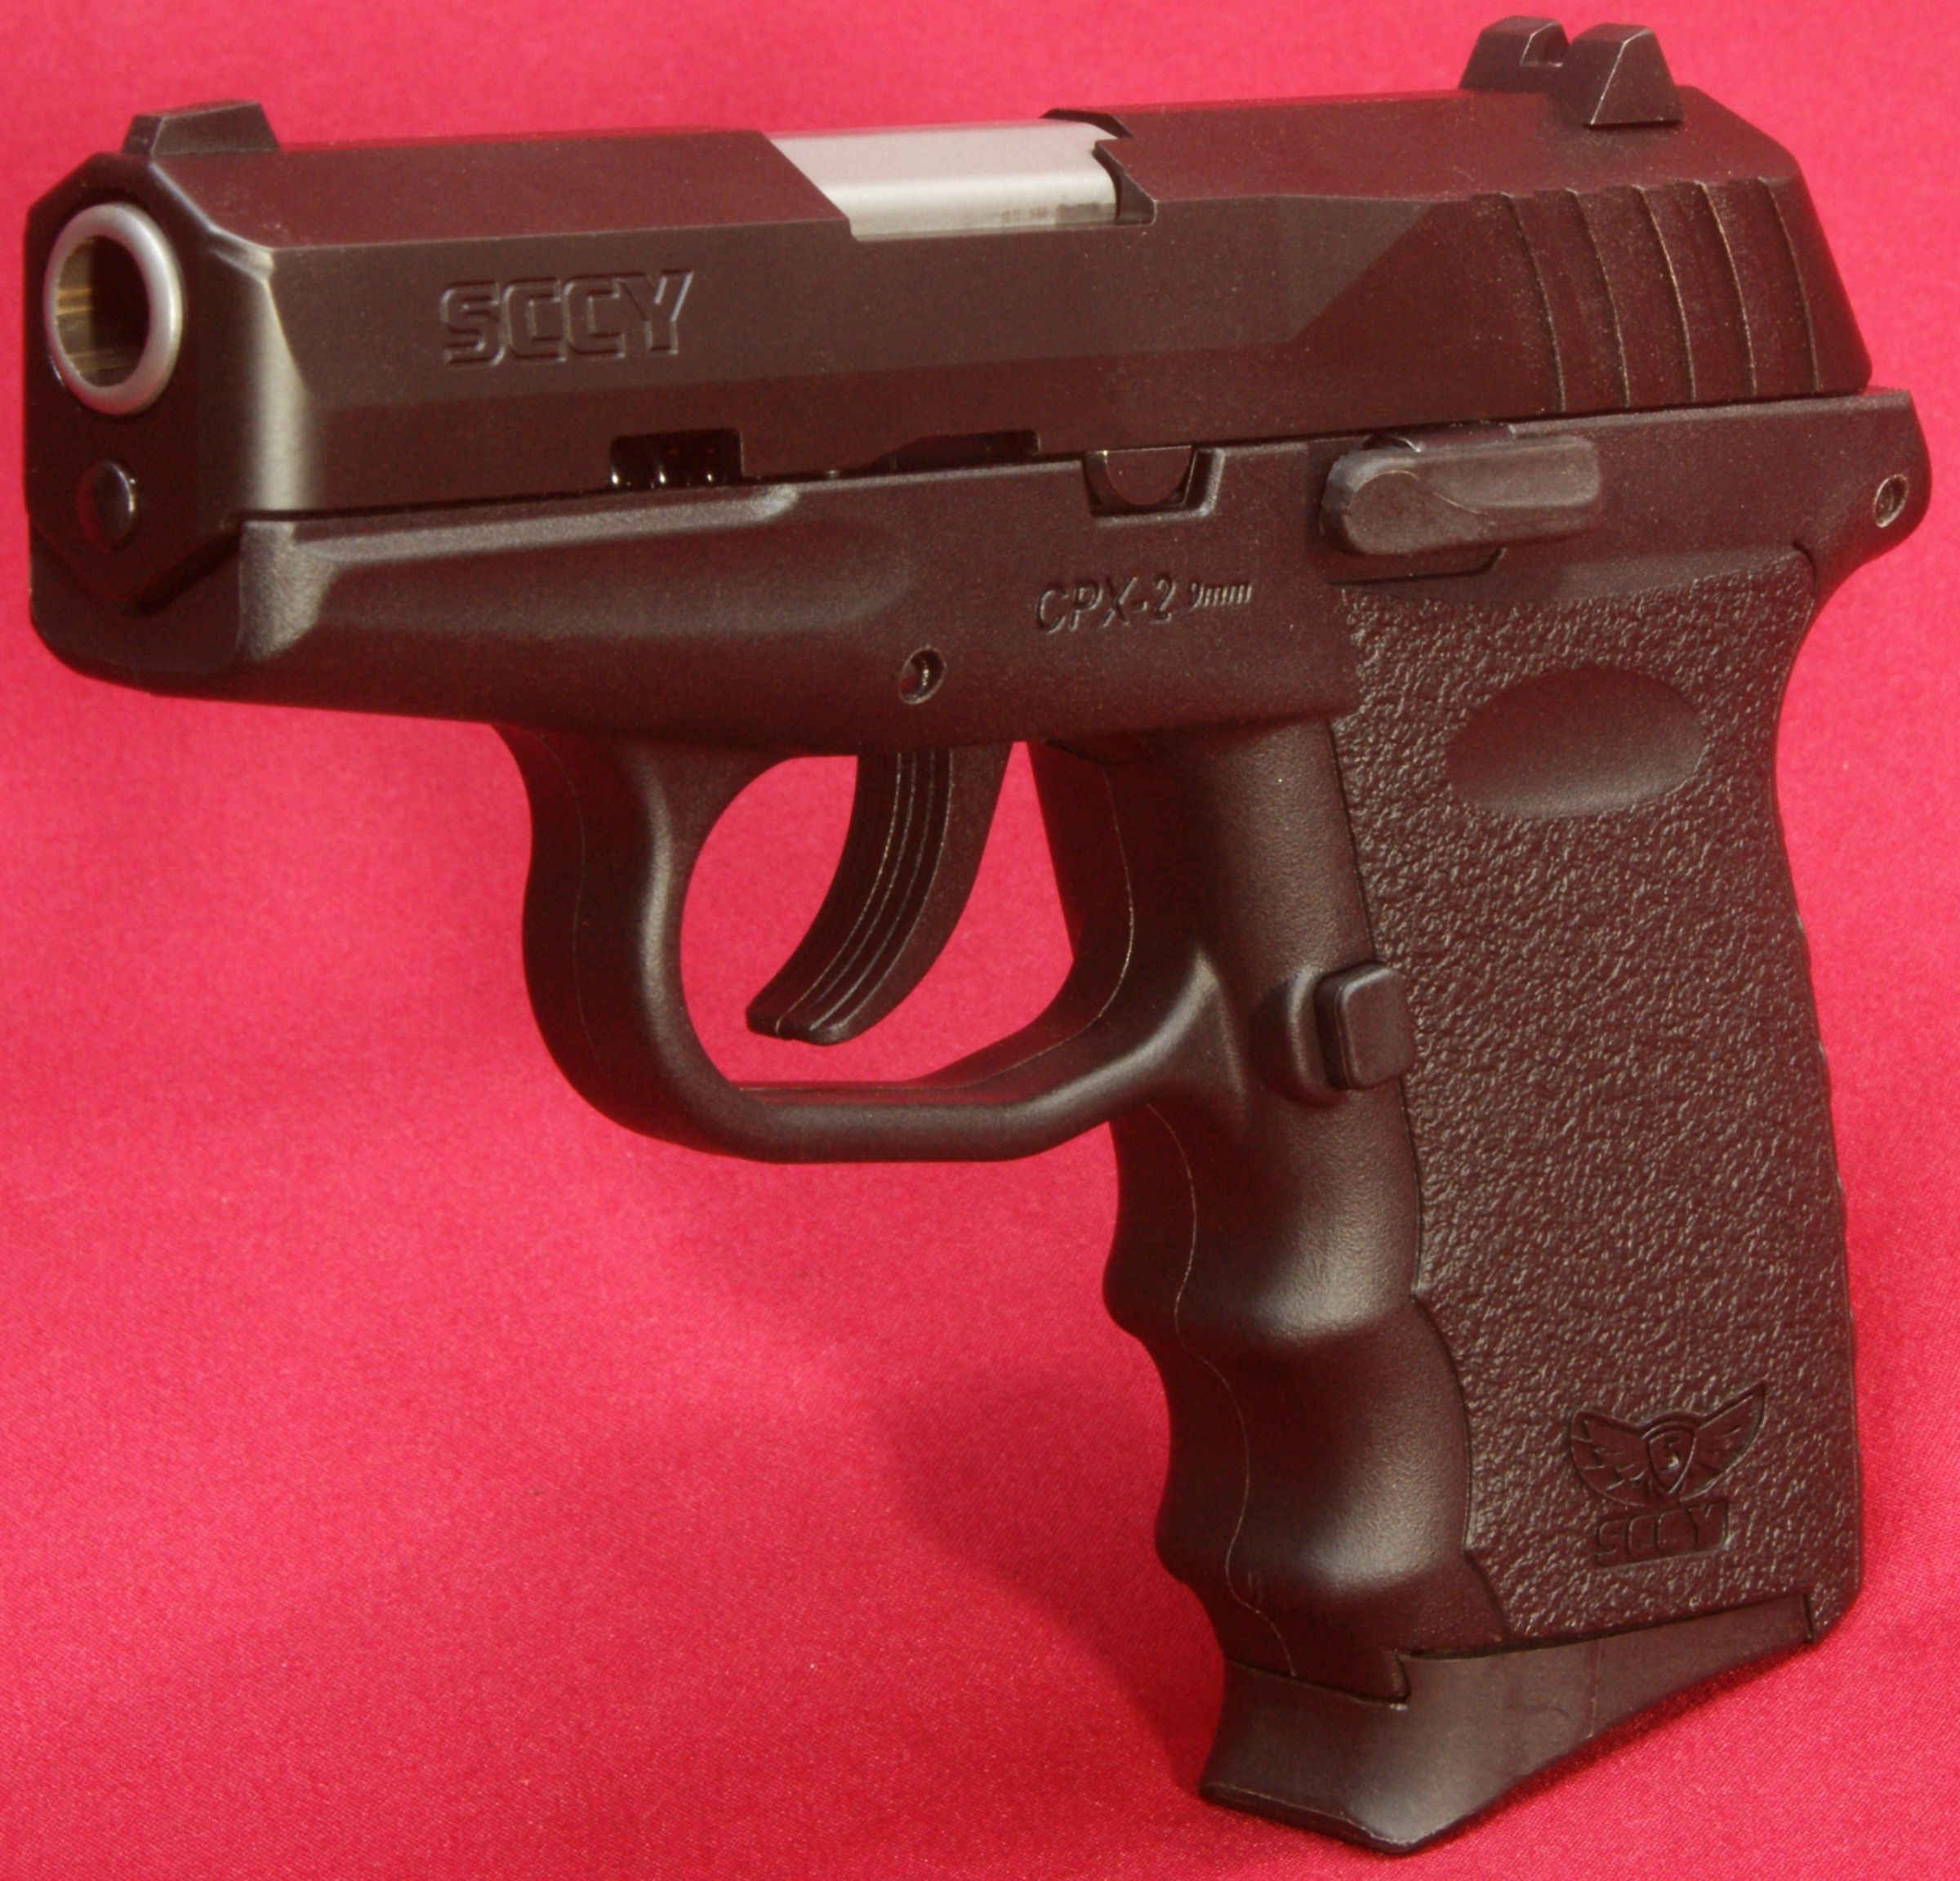 In this part of my Sccy CPX-2 Pistol review, I show the internal features o...